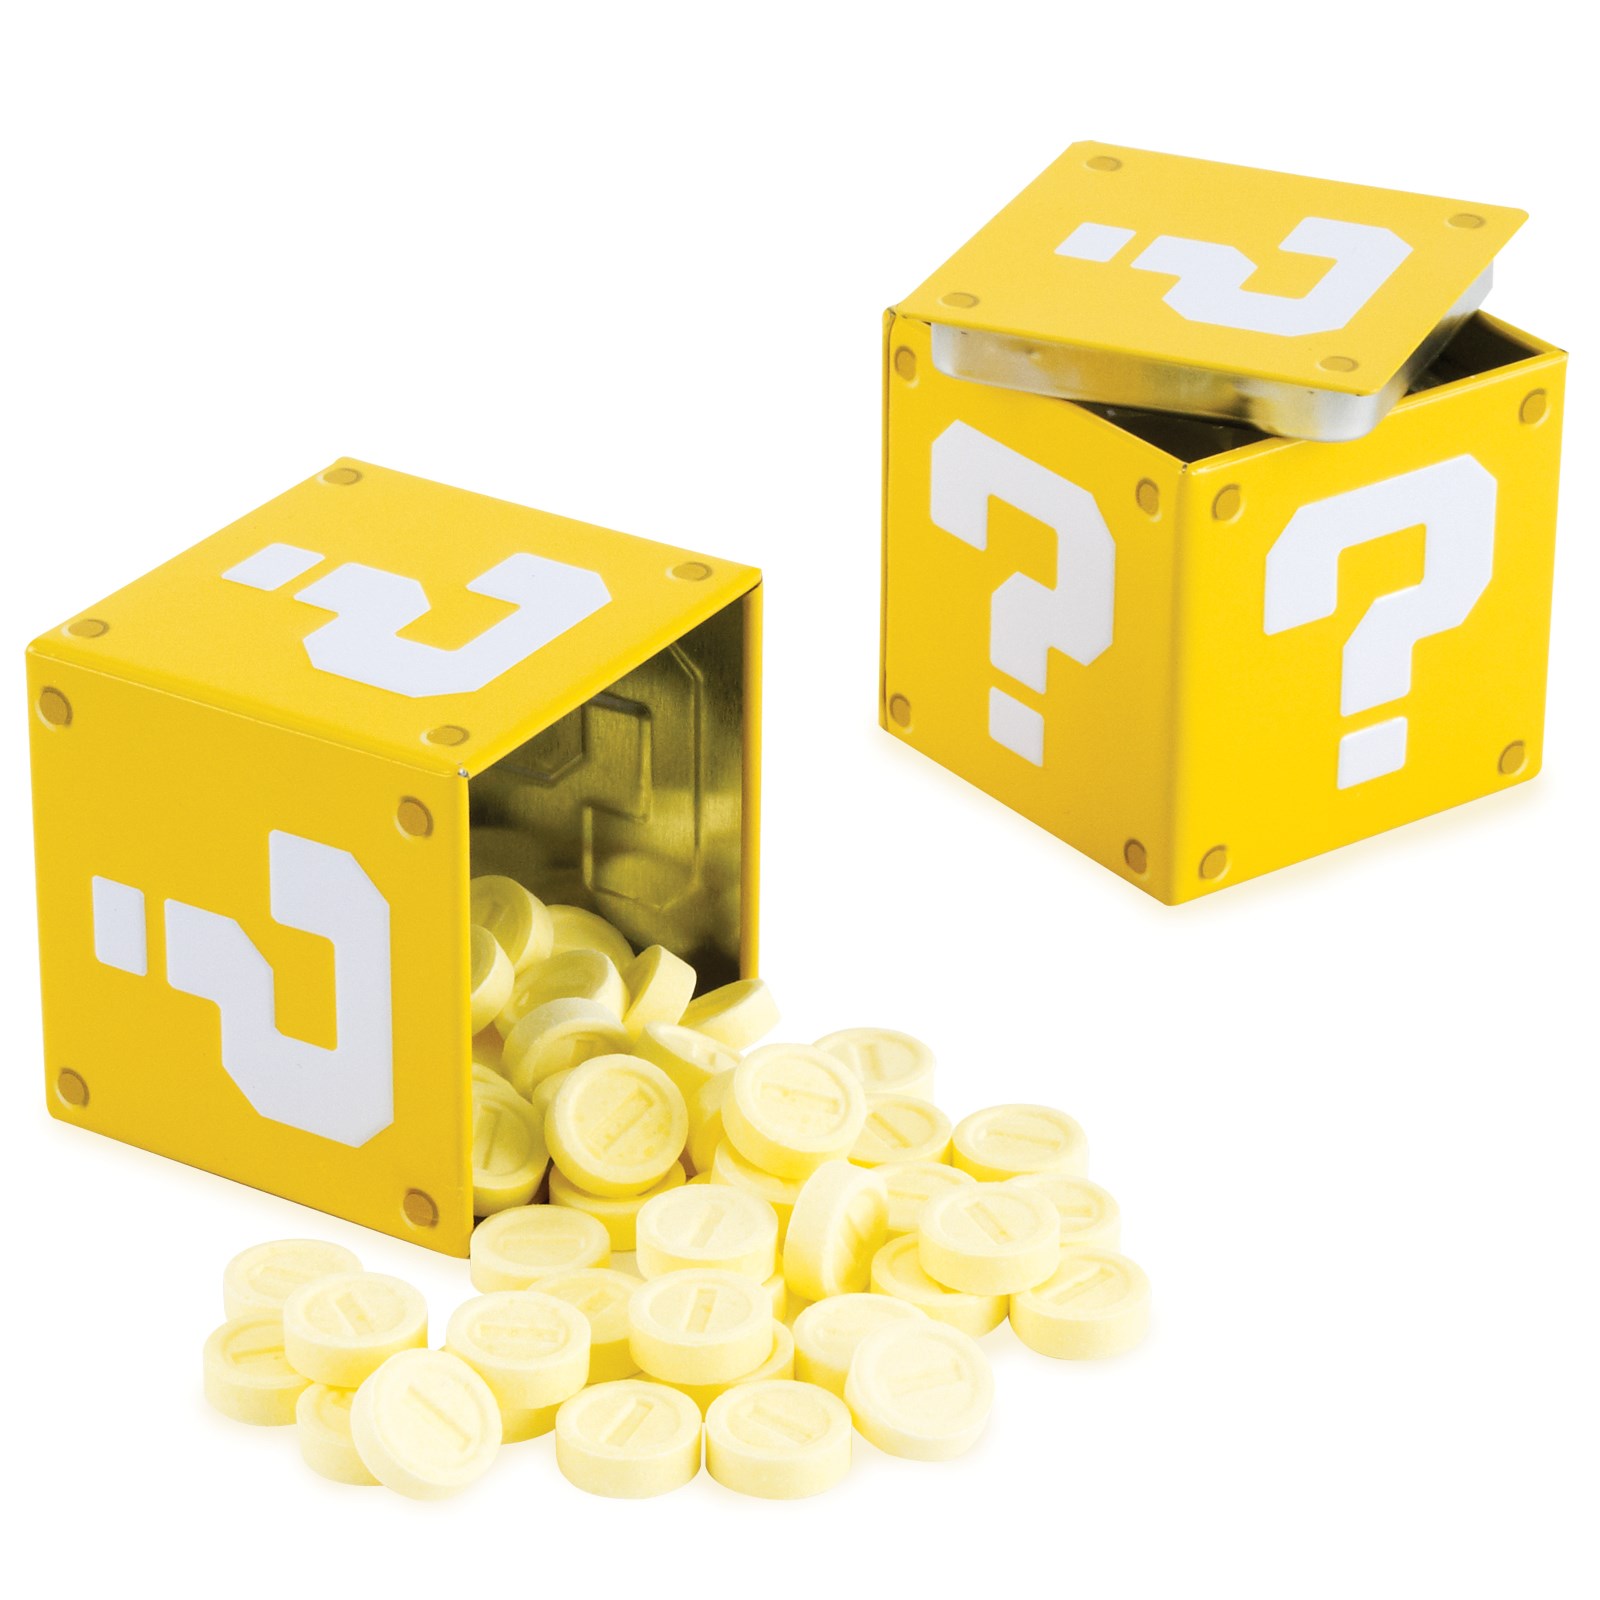 Super Mario Question Mark Box with Coin Shaped Candies